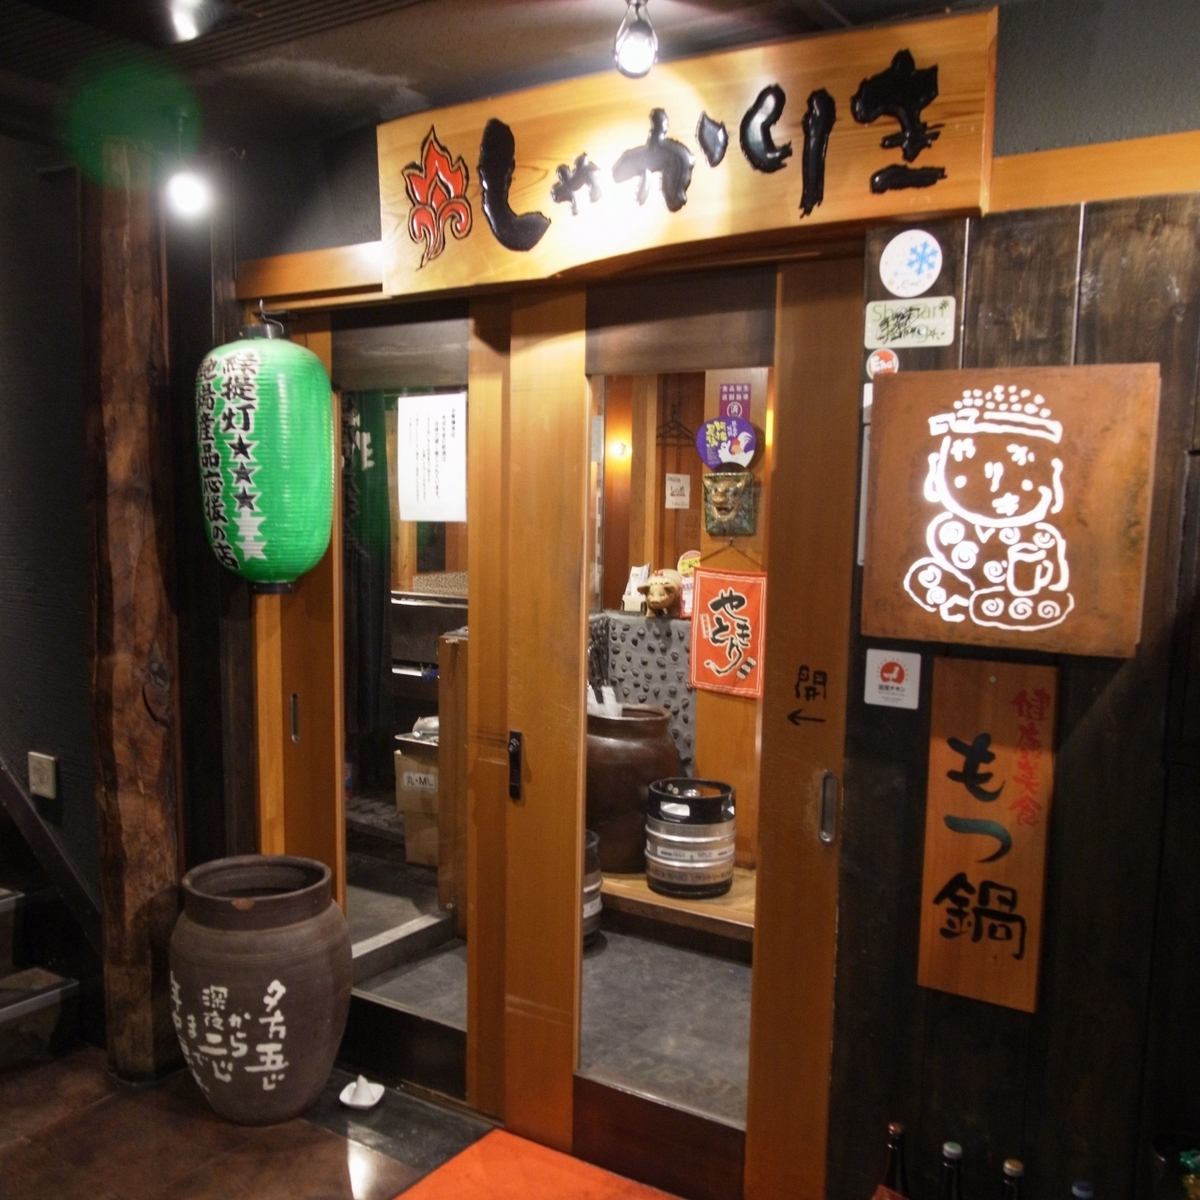 The tatami room can accommodate up to 30 people.